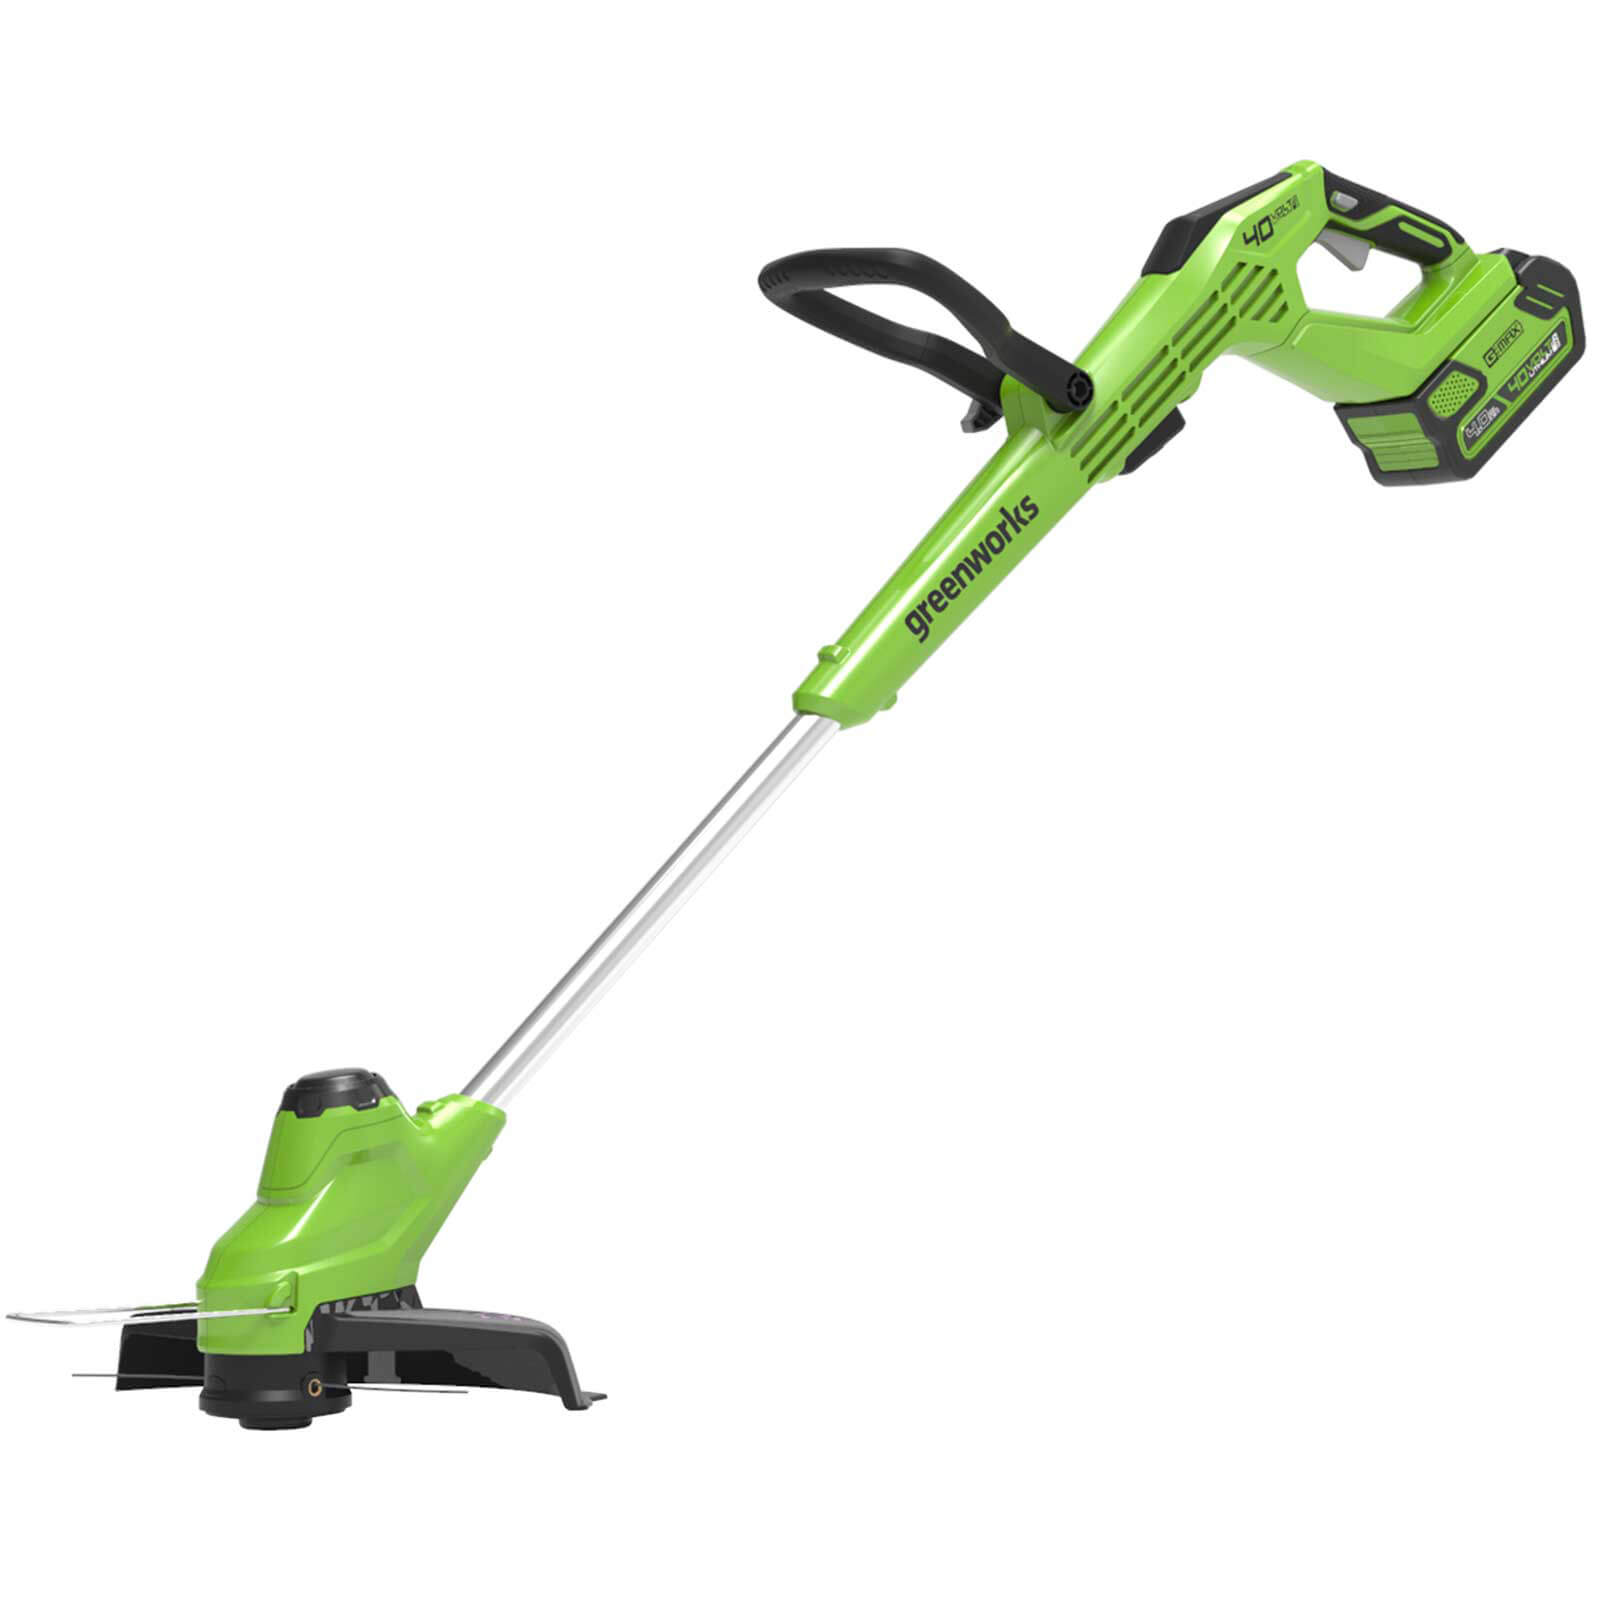 Image of Greenworks G40T5 40v Cordless Grass Trimmer and Edger 300mm 1 x 2ah Li-ion Charger